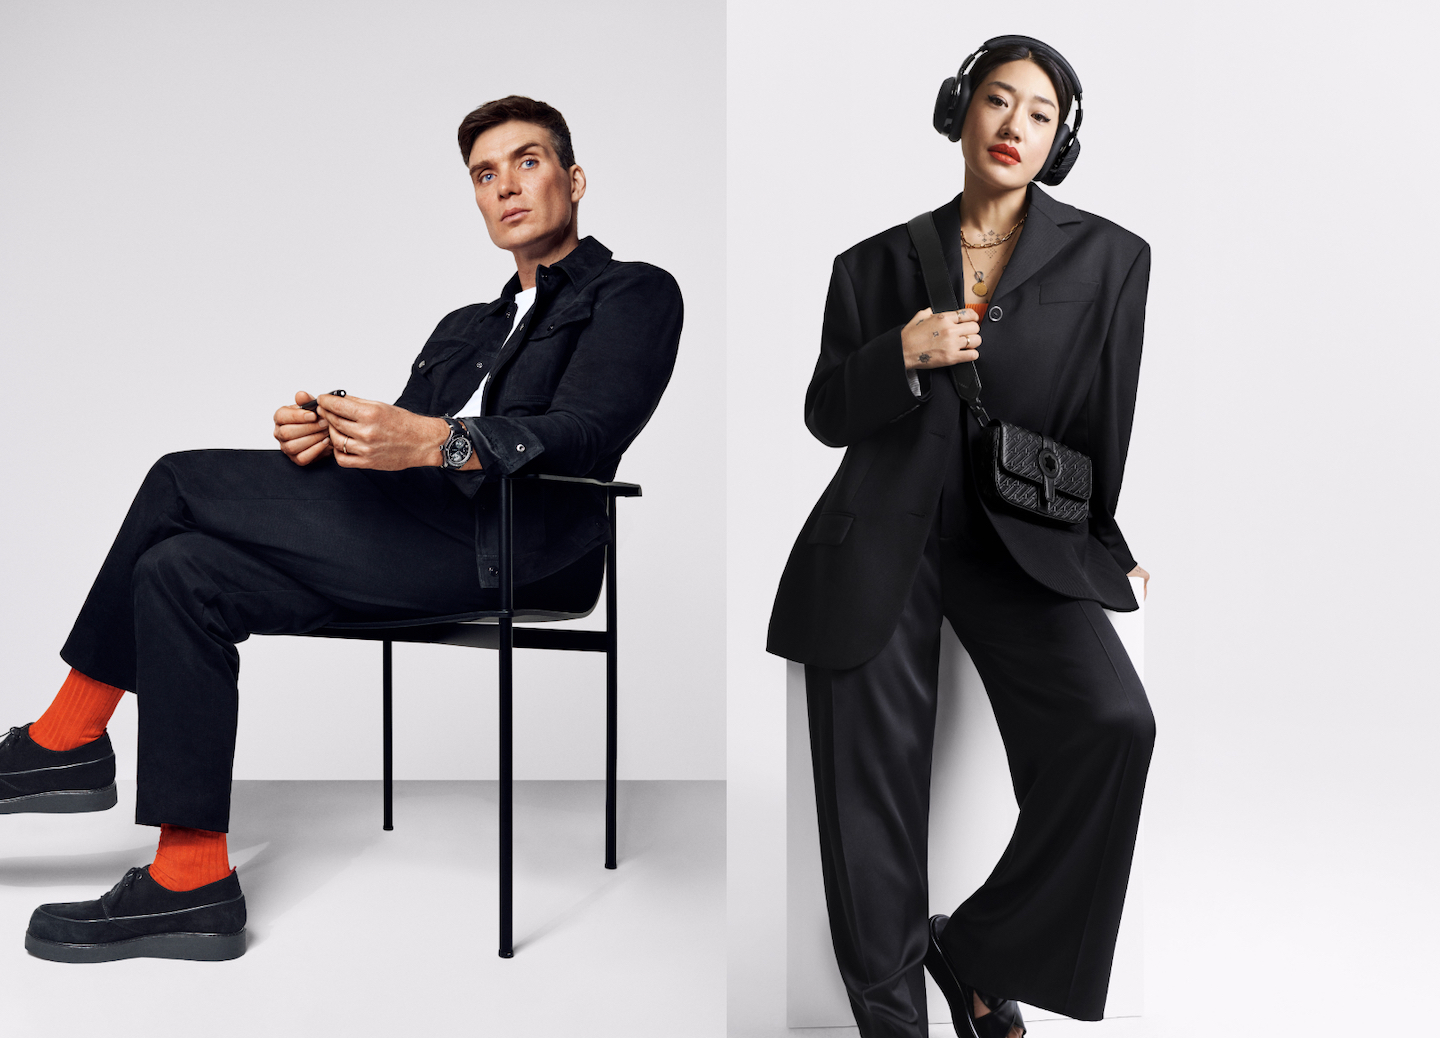 Actor Cillian Murphy and DJ Peggy Gou join Montblanc's 'What Moves